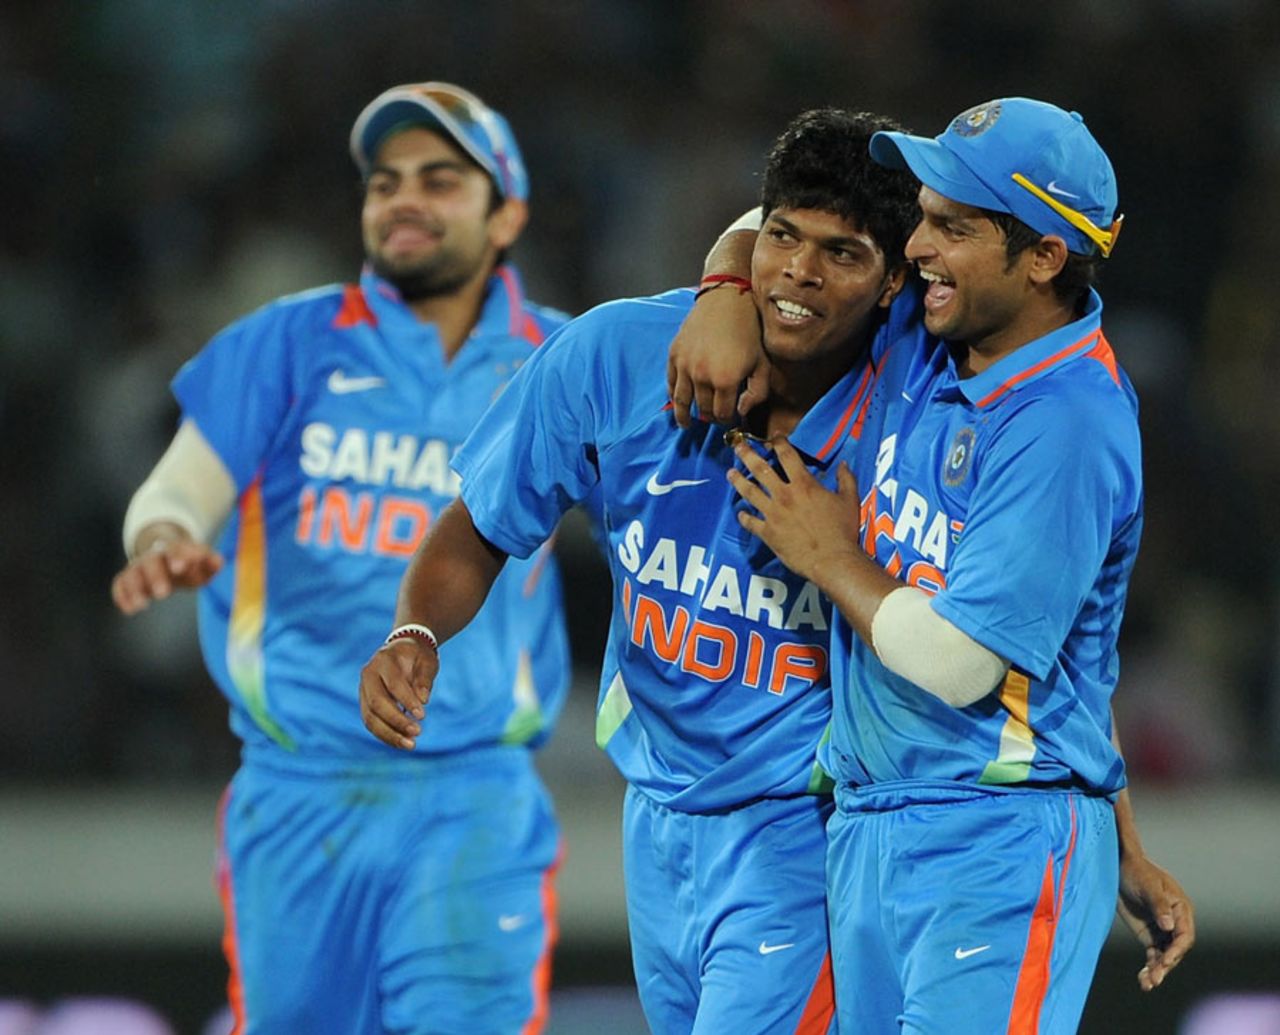 Umesh Yadav is congratulated after one of his two wickets, India v England, 1st ODI, Hyderabad, October 14, 2011